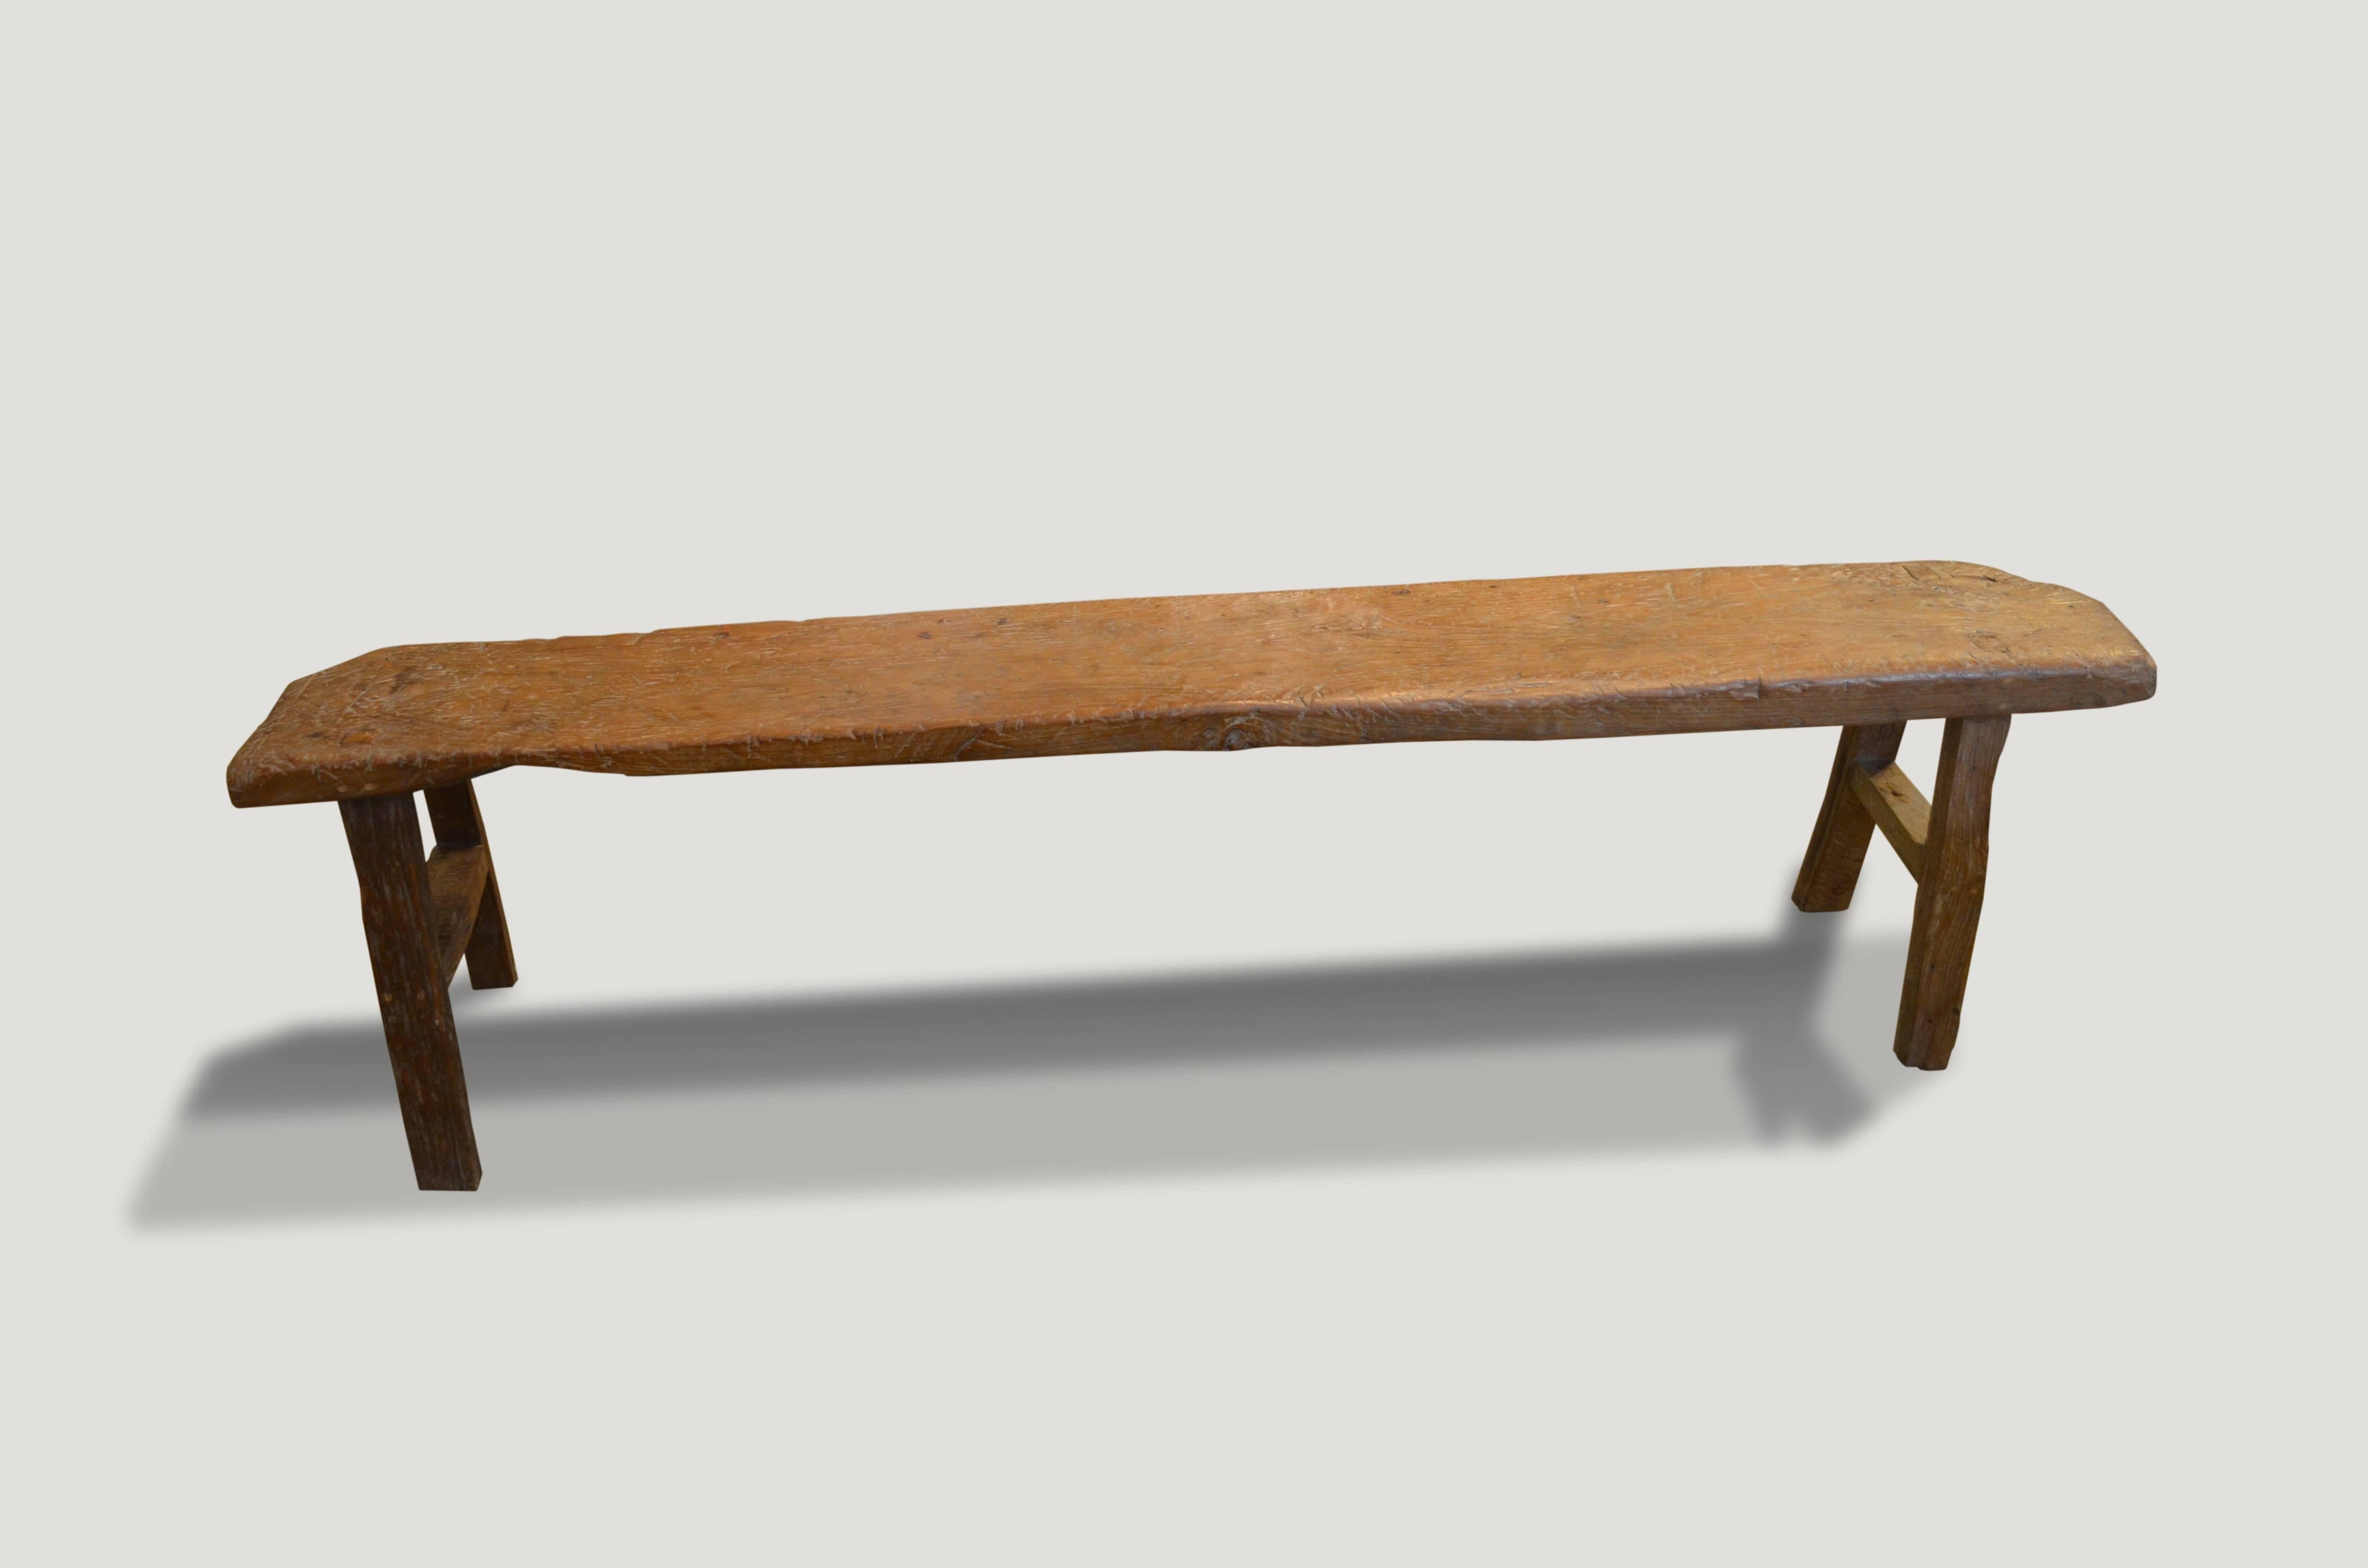 Antique 2” single slab, natural aged teak wood bench or shelf.

This bench or shelf was sourced in the spirit of wabi-sabi, a Japanese philosophy that beauty can be found in imperfection and impermanence. It’s a beauty of things modest and humble.